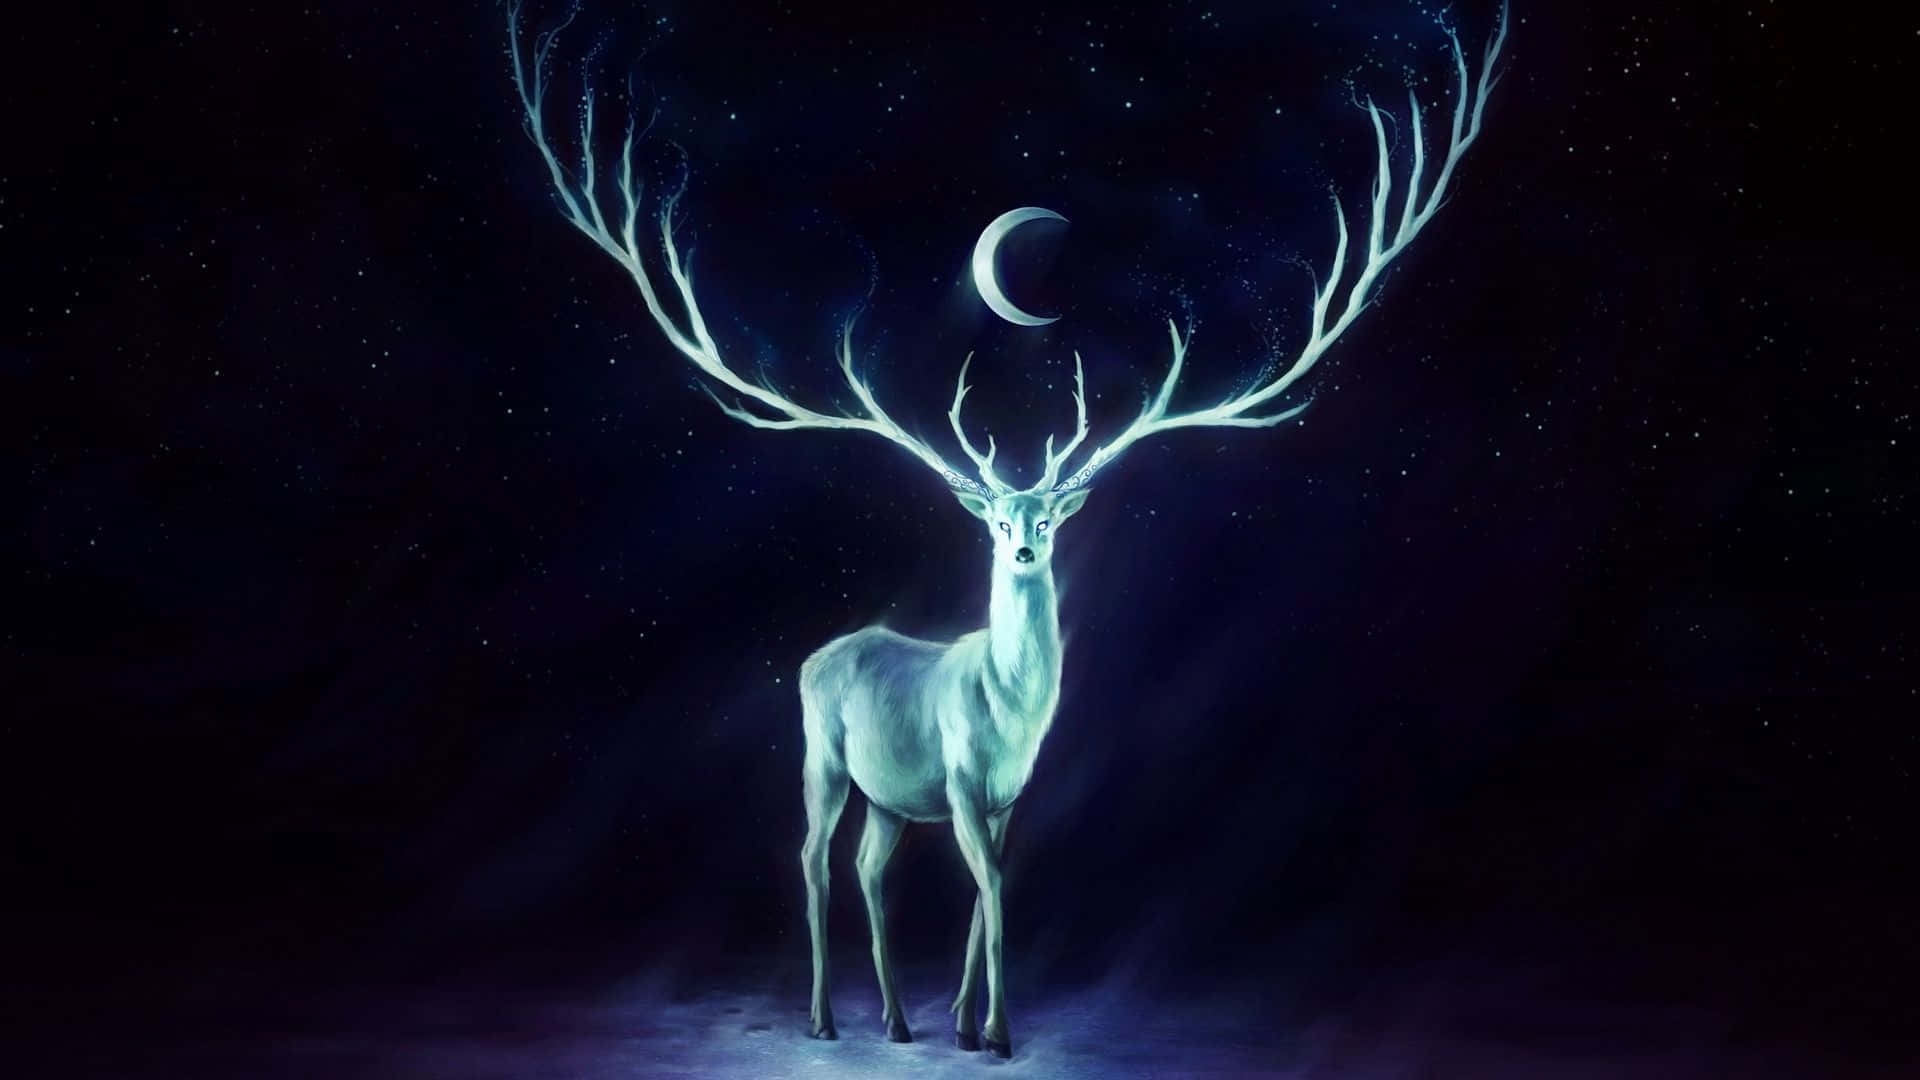 A Majestic Cool Deer Standing in Front of Glistening Mountains Wallpaper